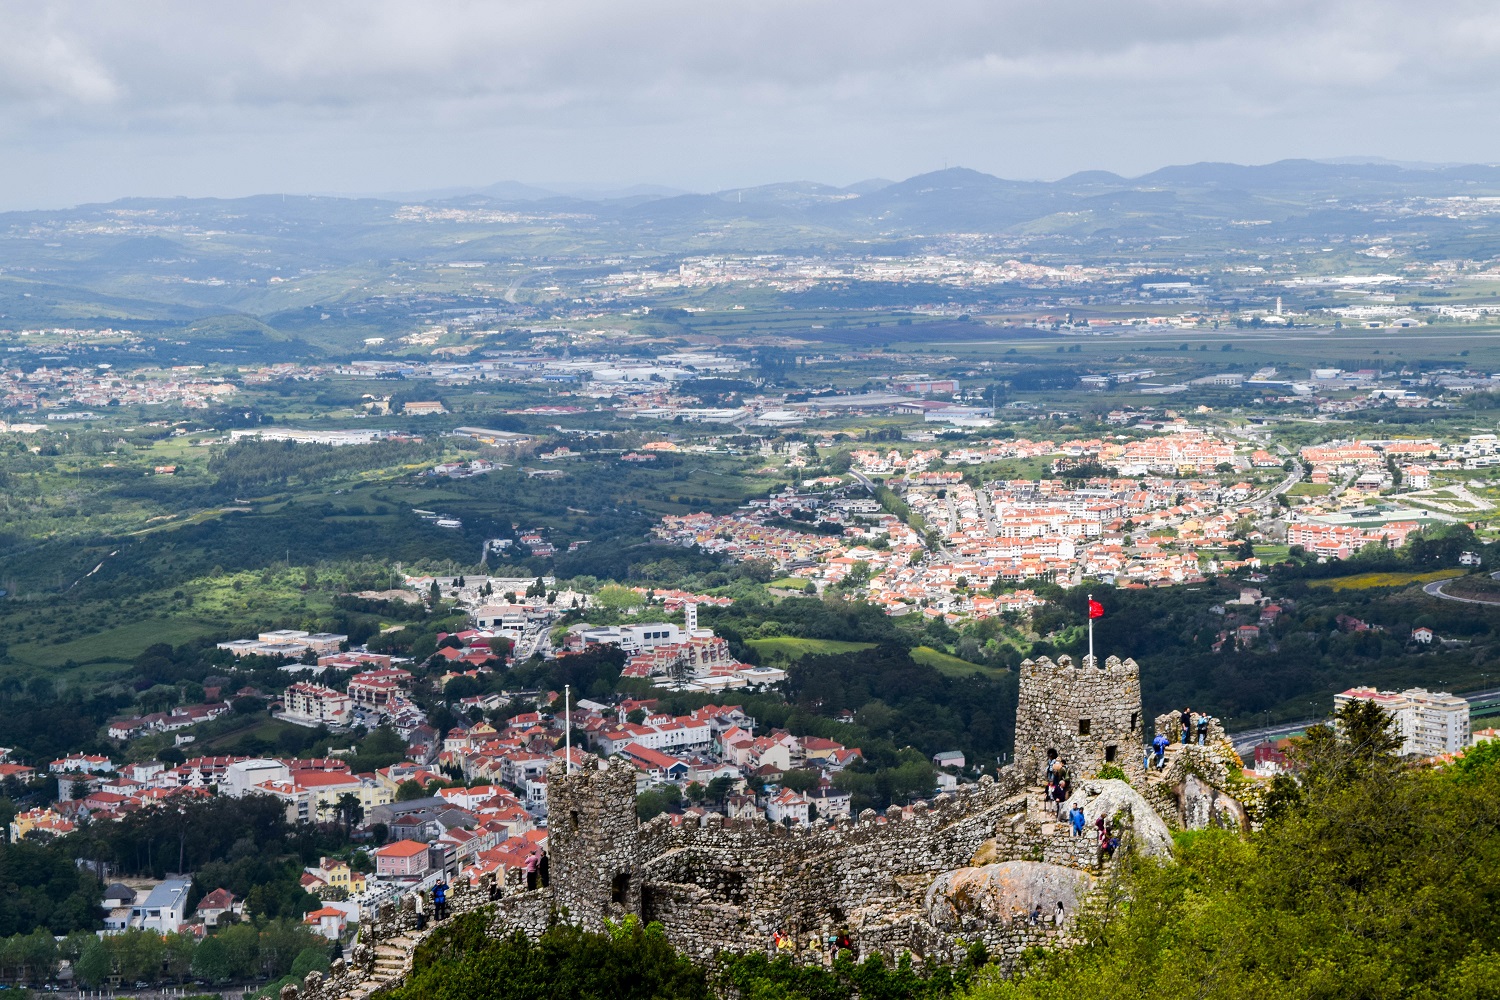 View from the Castelo dos Mouros